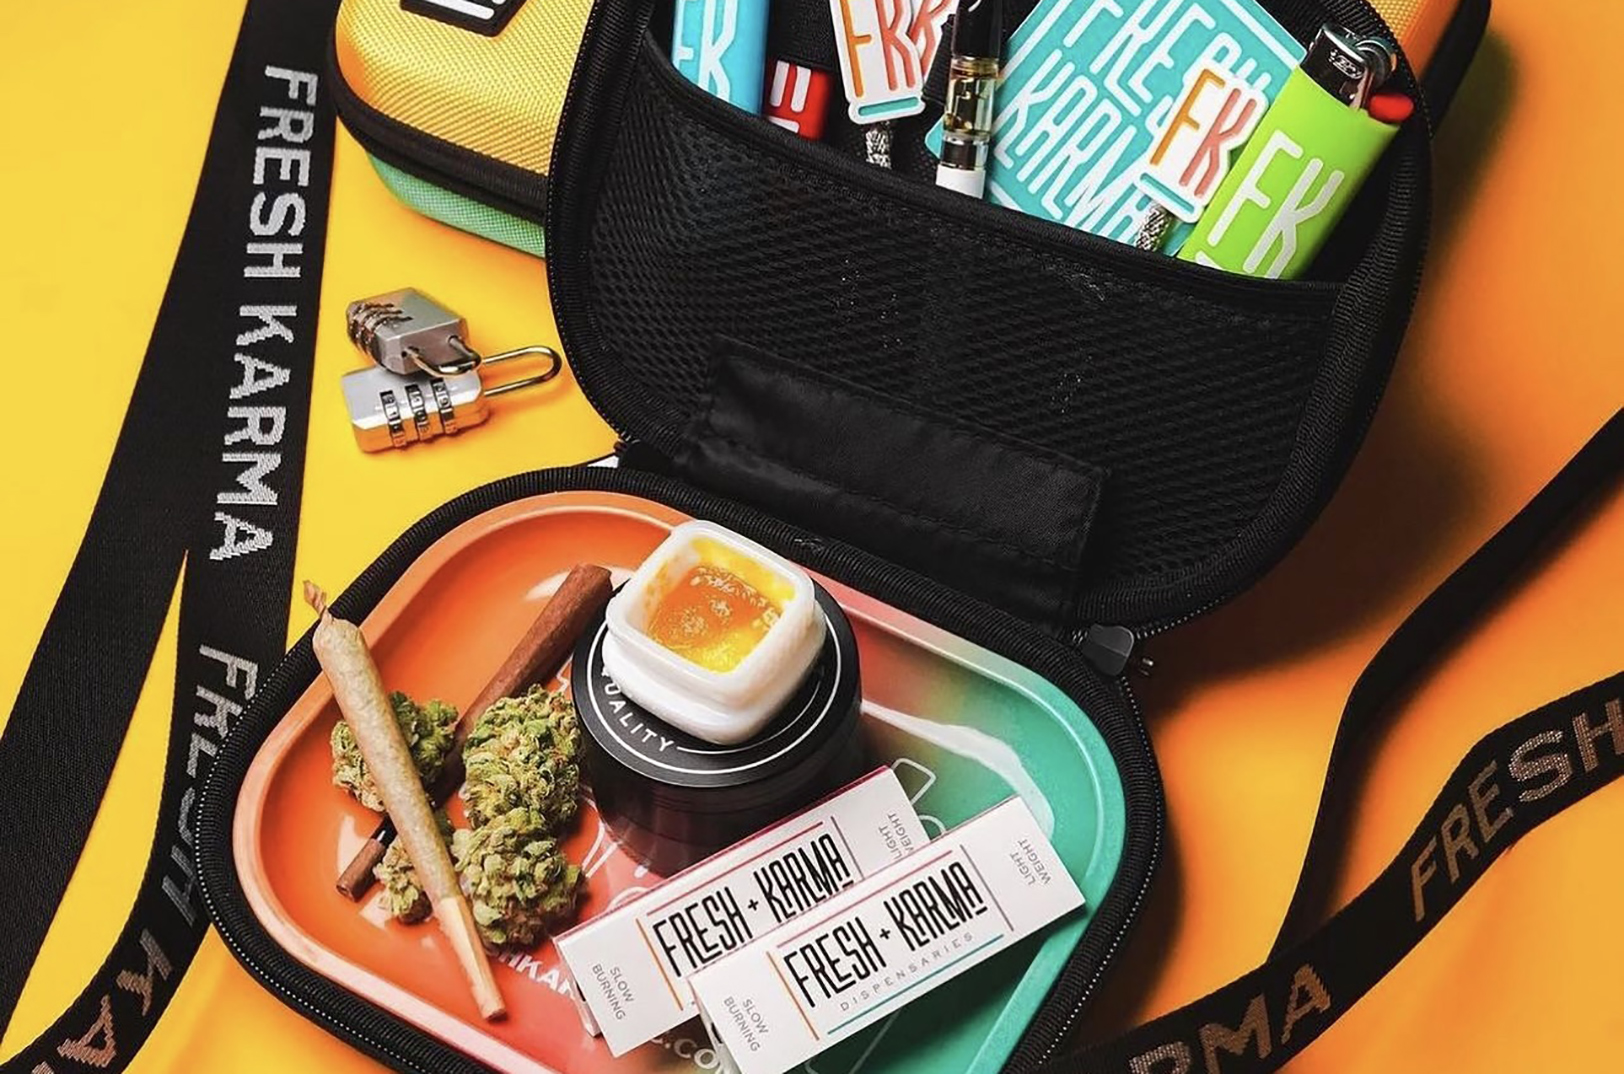 Fashion meets cannabis: This KS-engineered, on-the-go rolling station blocks odors, makes smoking prep safer